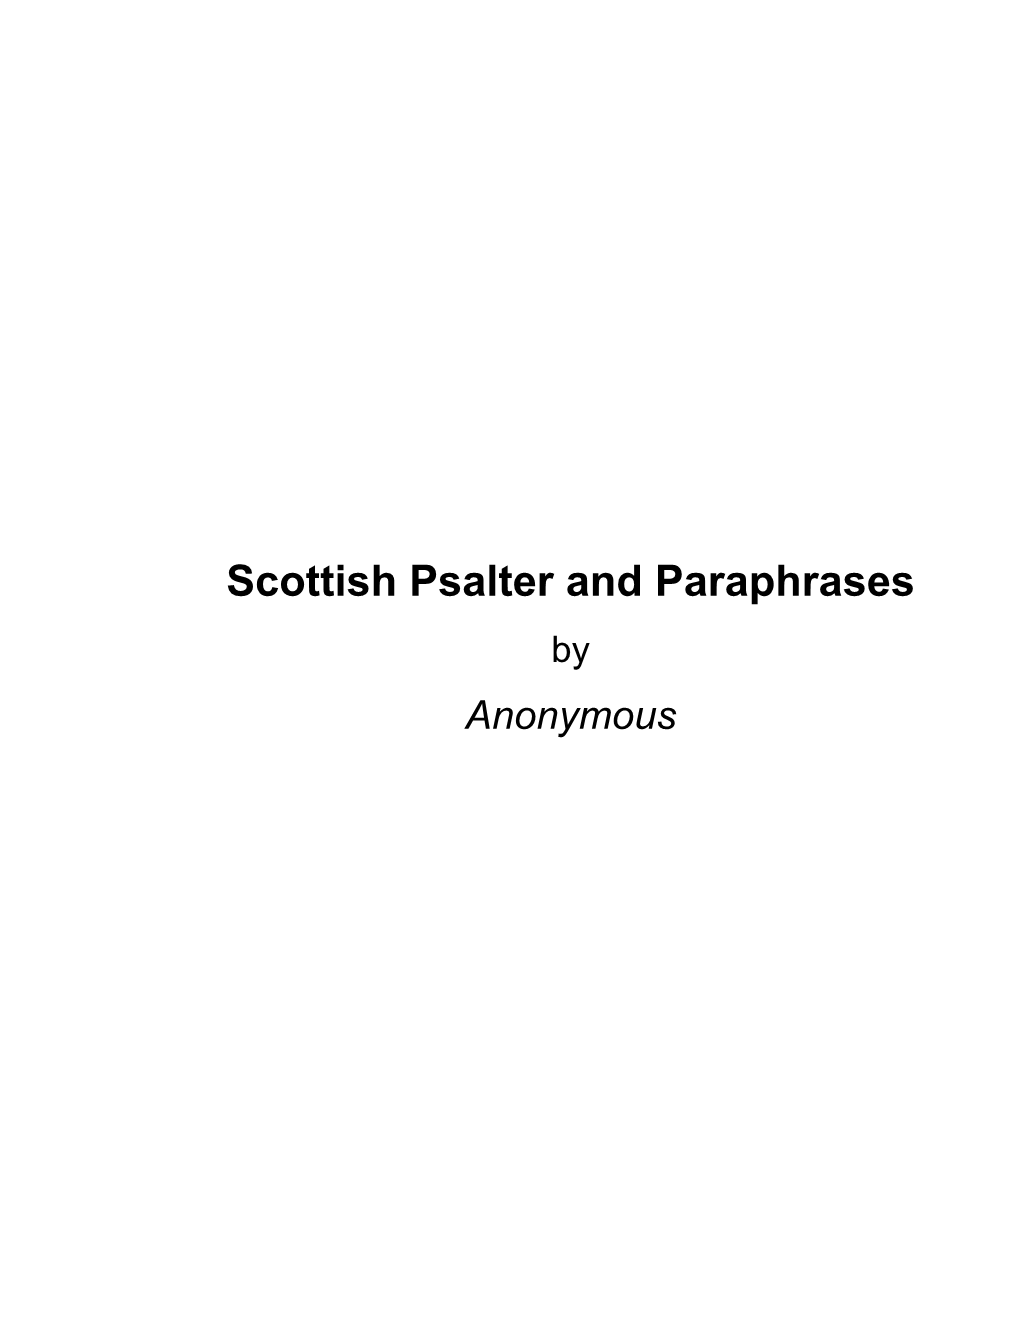 Scottish Psalter and Paraphrases by Anonymous About Scottish Psalter and Paraphrases